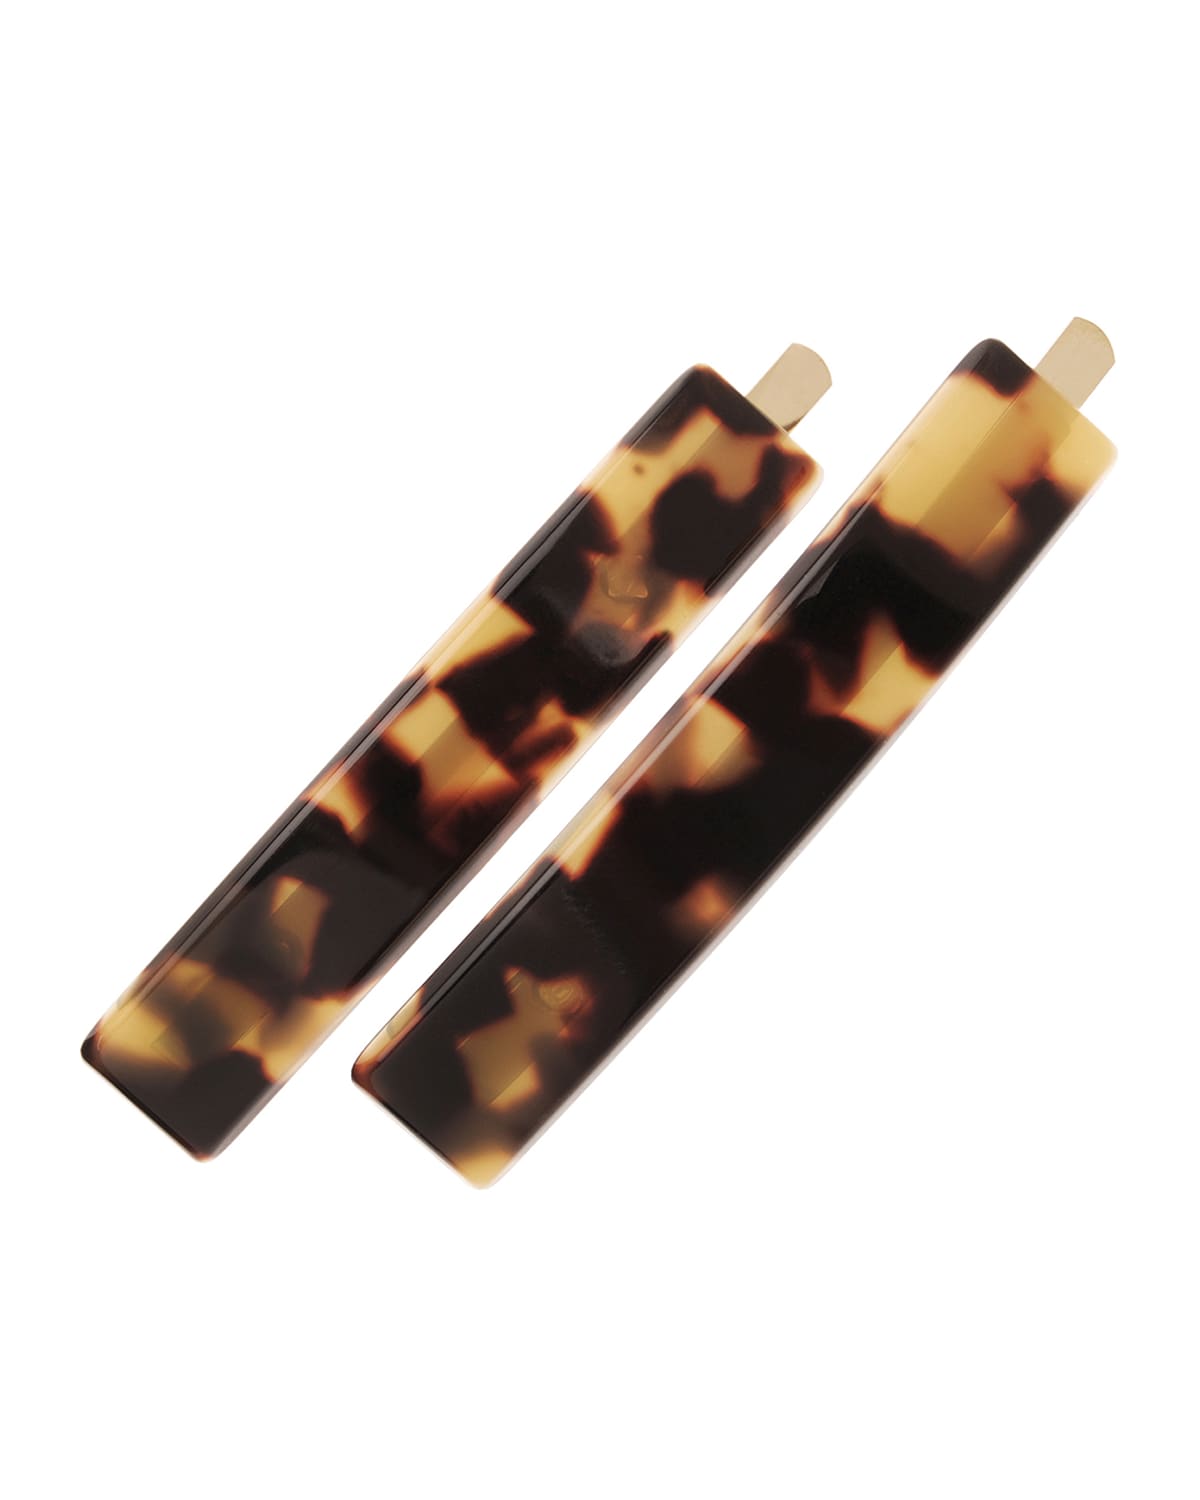 France Luxe Mod Bobby Pin Pair - Classic In Tokyo